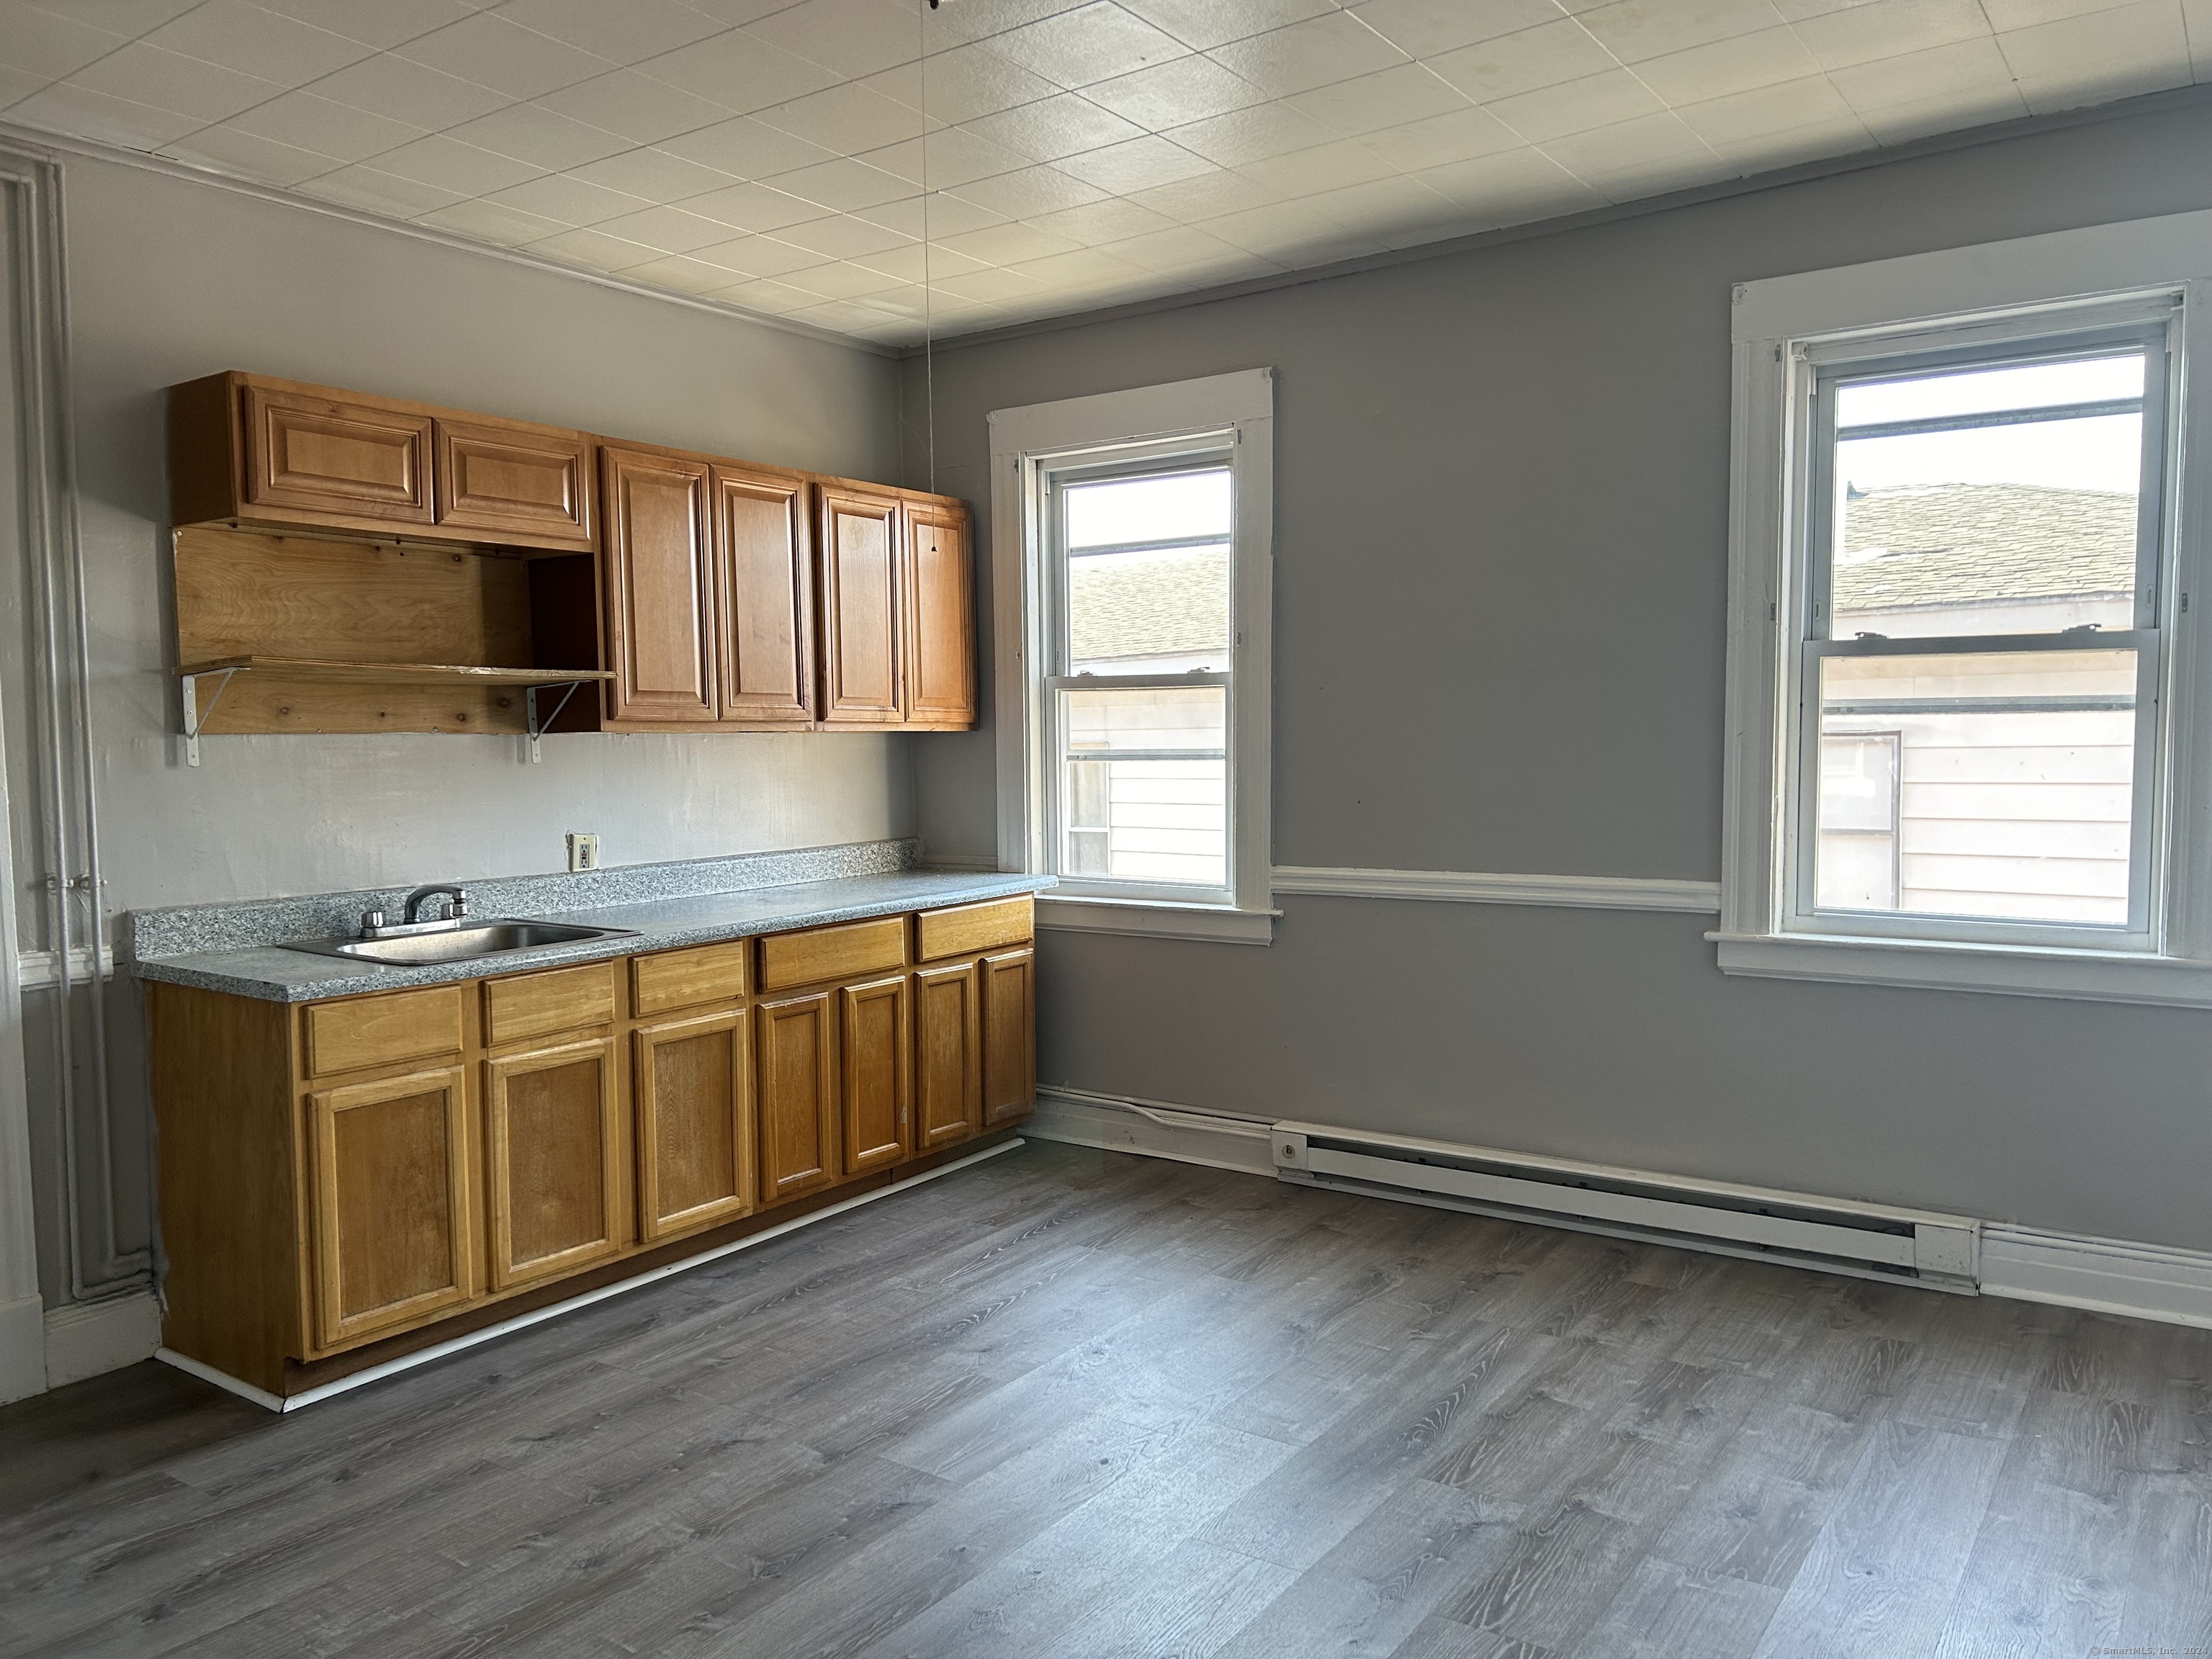 20 Beatty Street 3W, New Britain, Connecticut - 2 Bedrooms  
1 Bathrooms  
5 Rooms - 